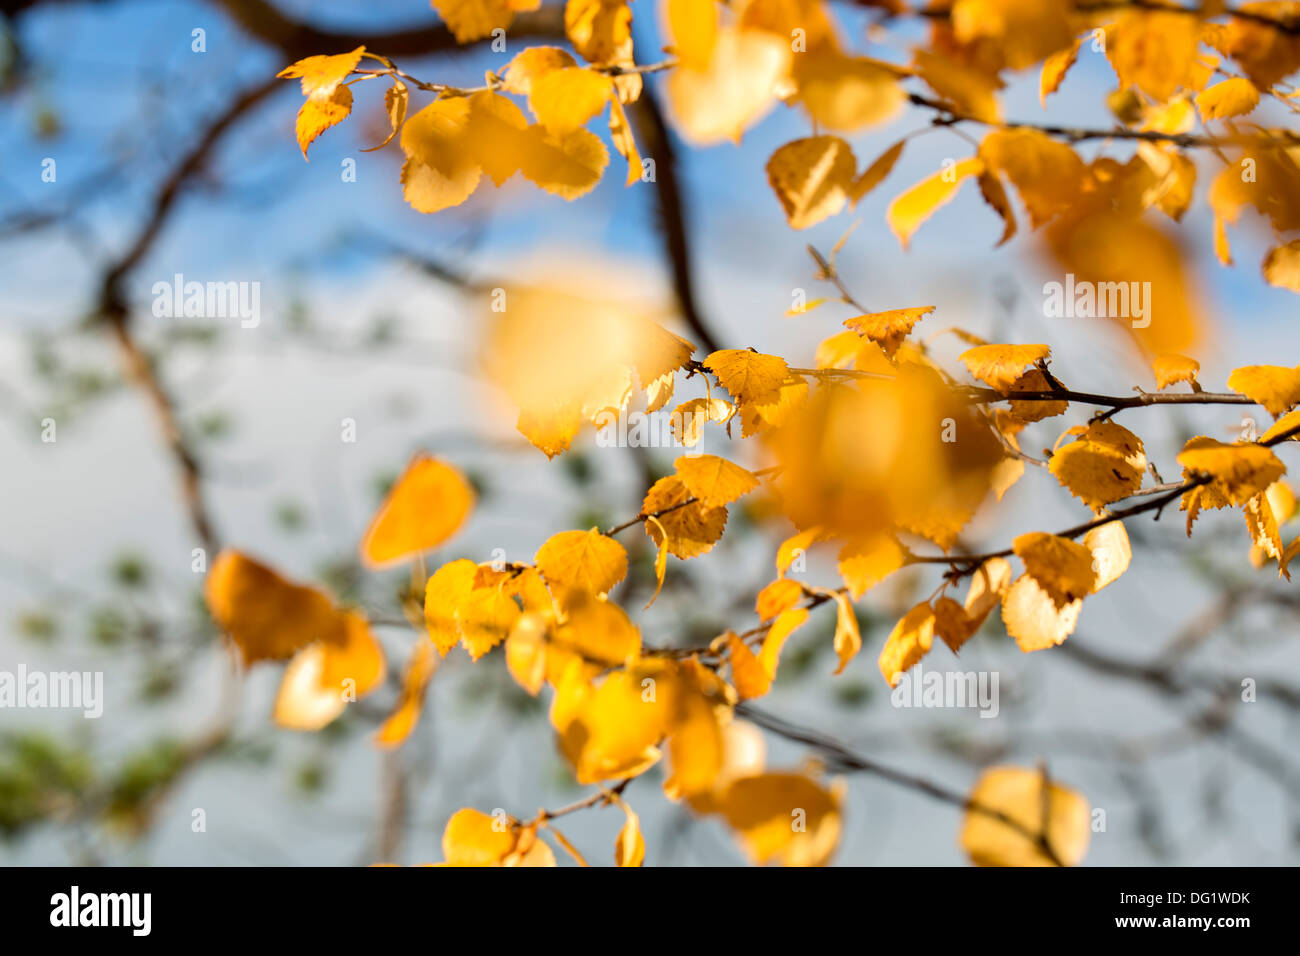 Birch leafs are still hanging on tree branches Stock Photo